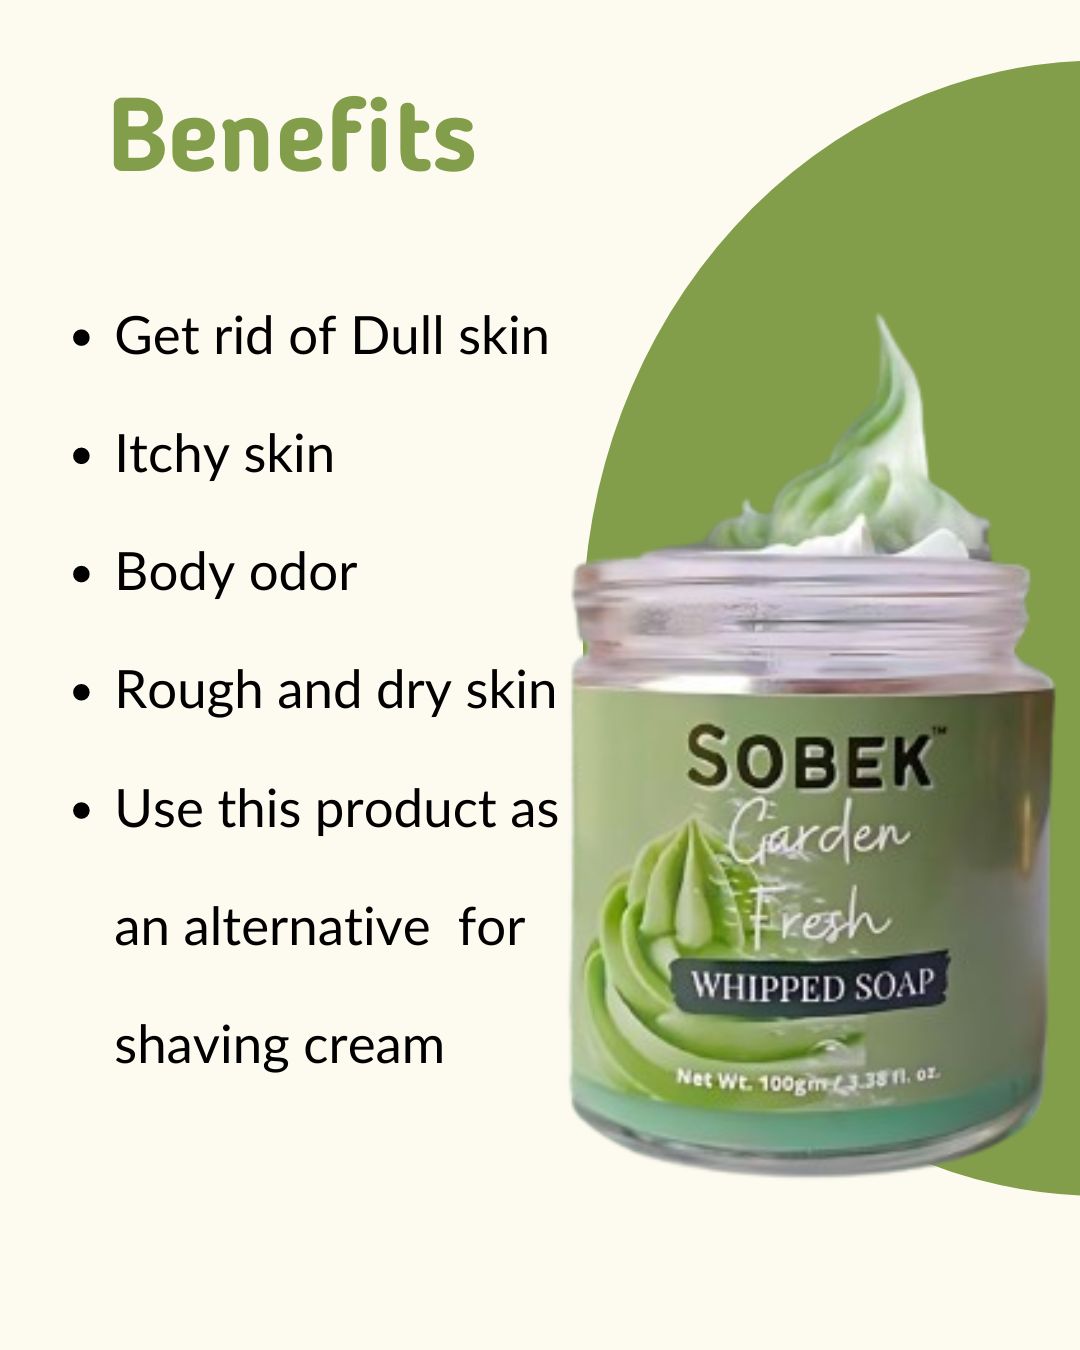 Infographic showing green whipped soap benefits